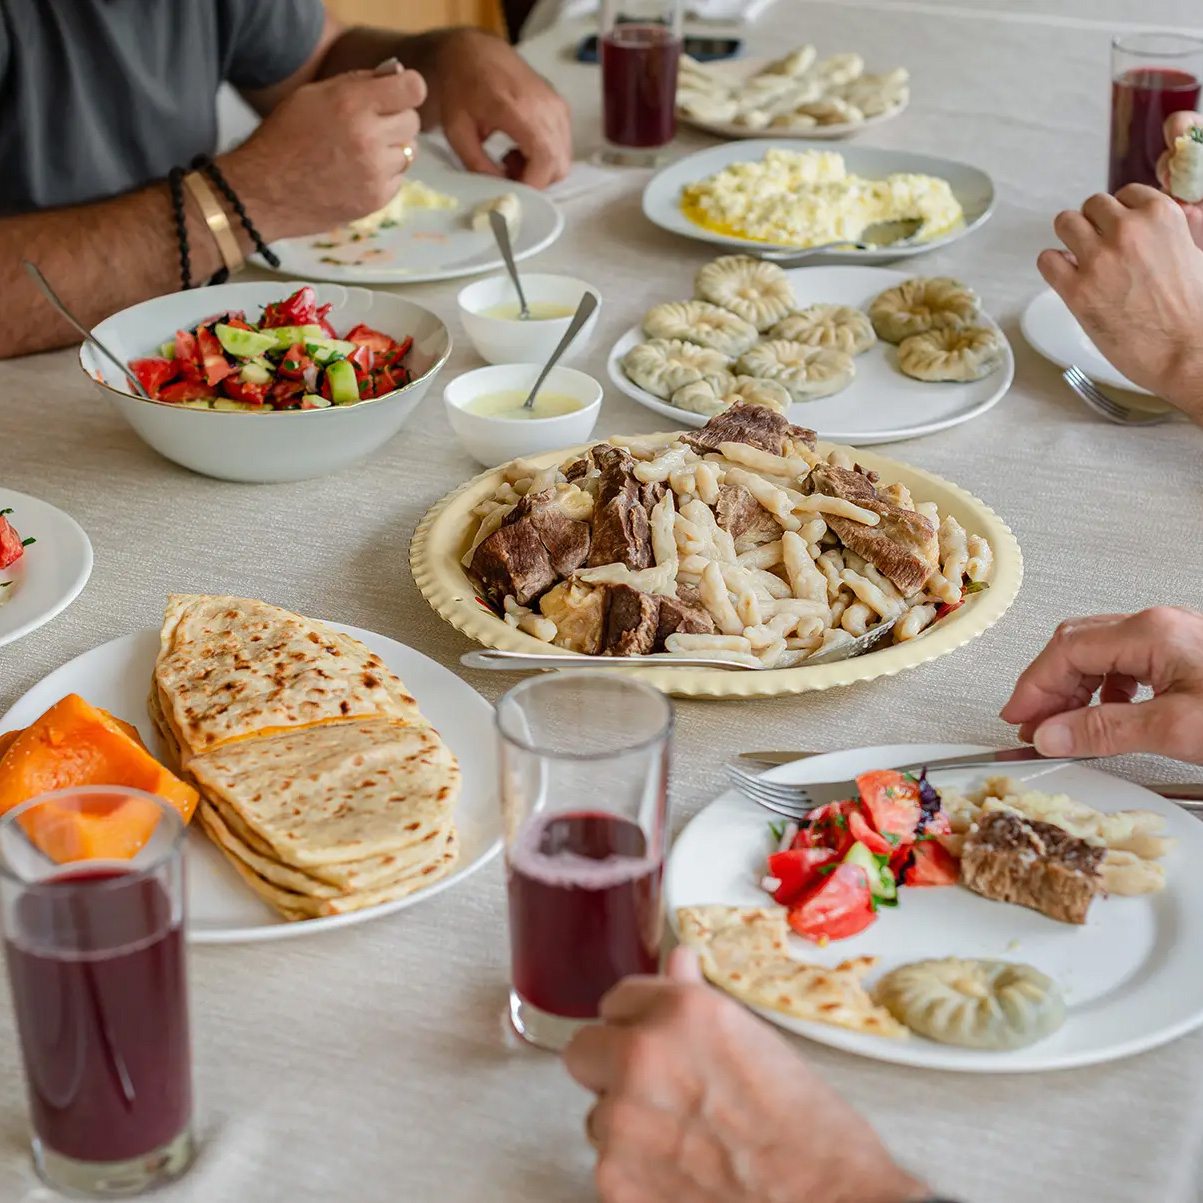 Muslim Georgia: A Journey to the Hidden Kitchens of the Kists